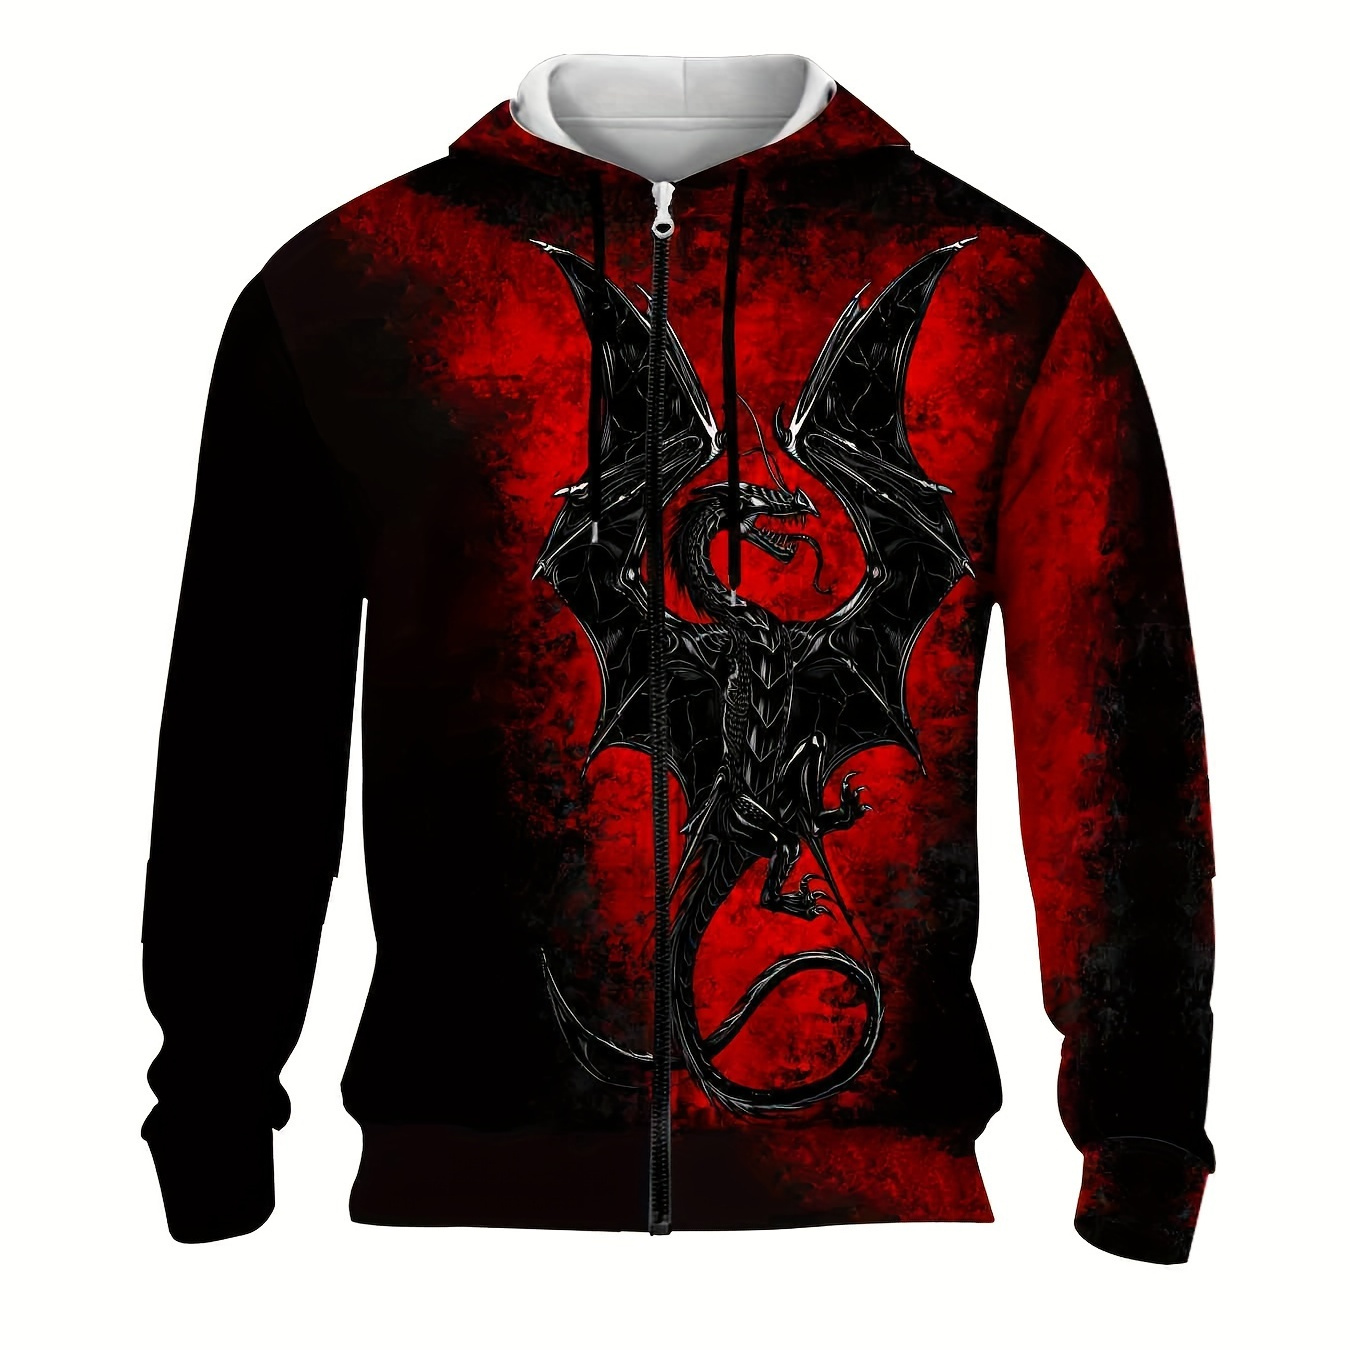 

Plus Size Men's Flying Beast Print Hooded Jacket Oversized Hoodie With Zipper For Autumn/winter, Men's Clothing